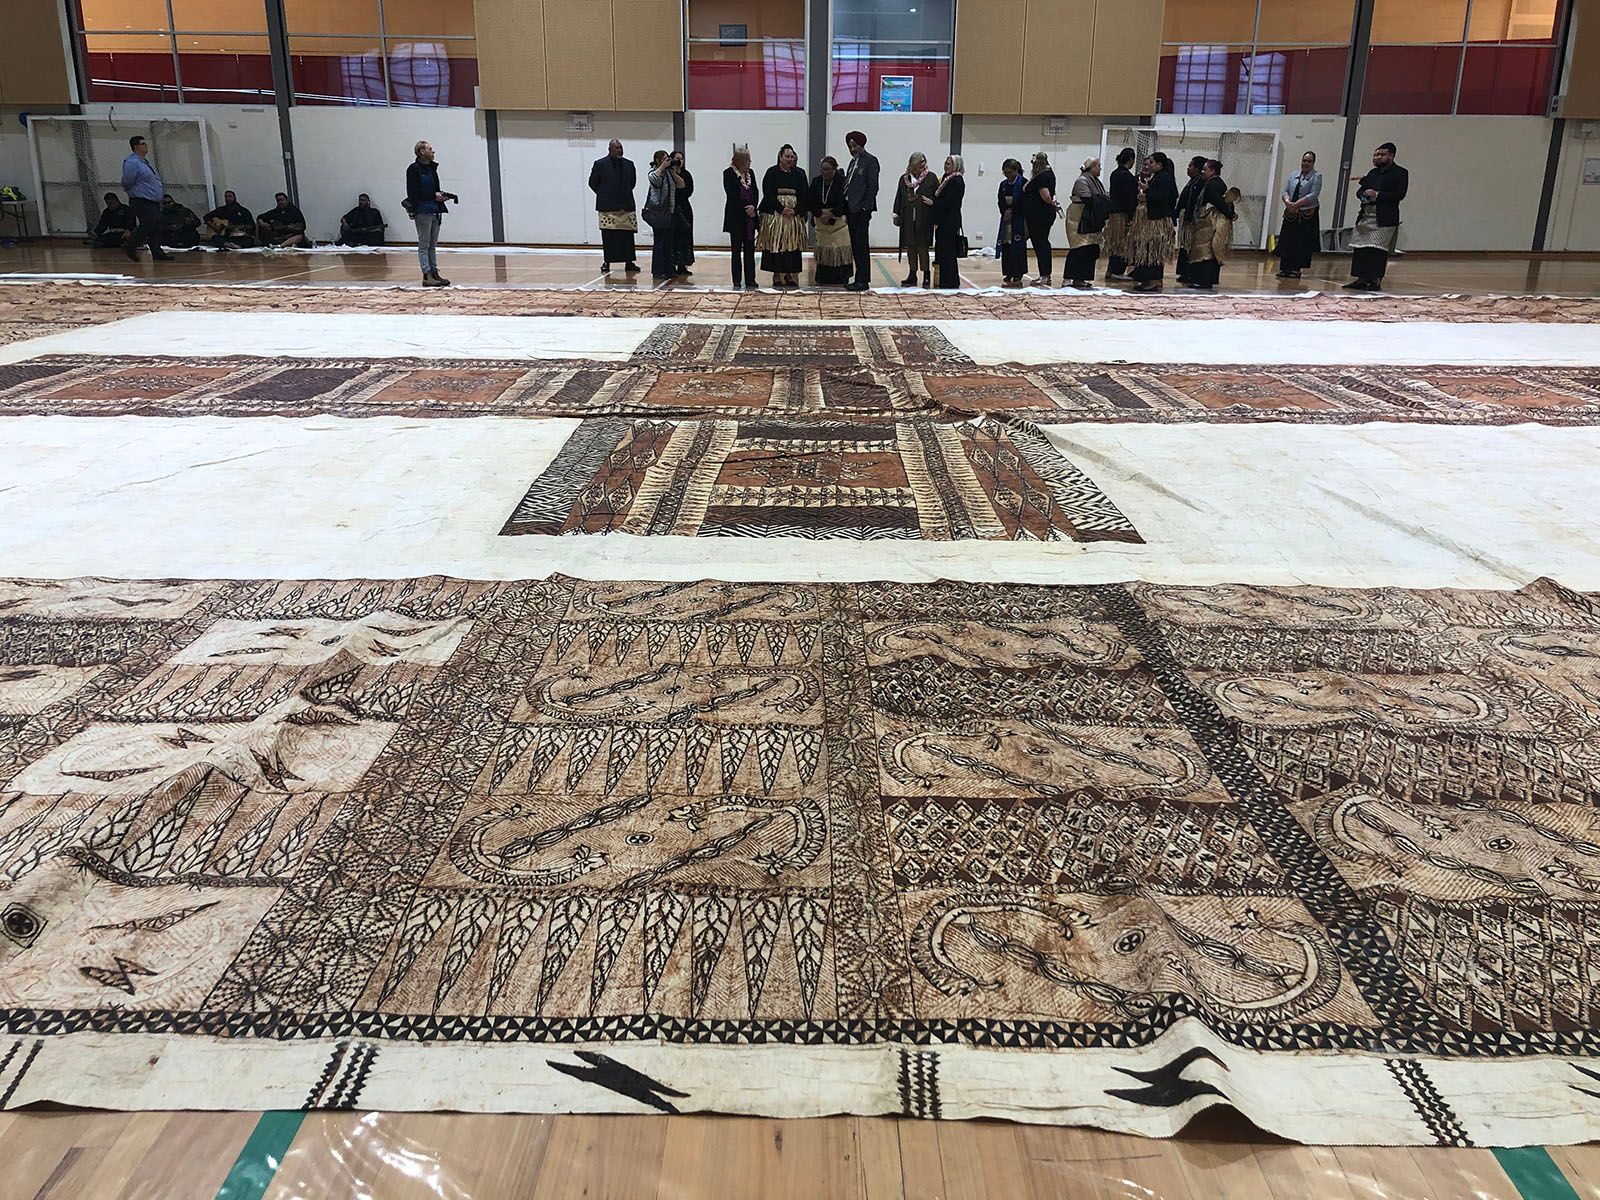 In a large interior space a decorated cloth covers the floor. It is an off-white colour, and the foreground and background borders are decorated in varying [traditional Tongan?] patterns painted in black and shades of brown. At the centre a large white rectangular section is decorated with a cross shape painted in patterns of the same but darker colours. A row of people, several wearing elements of traditional costume wrapped around their waists, stand on the far side of the cloth.